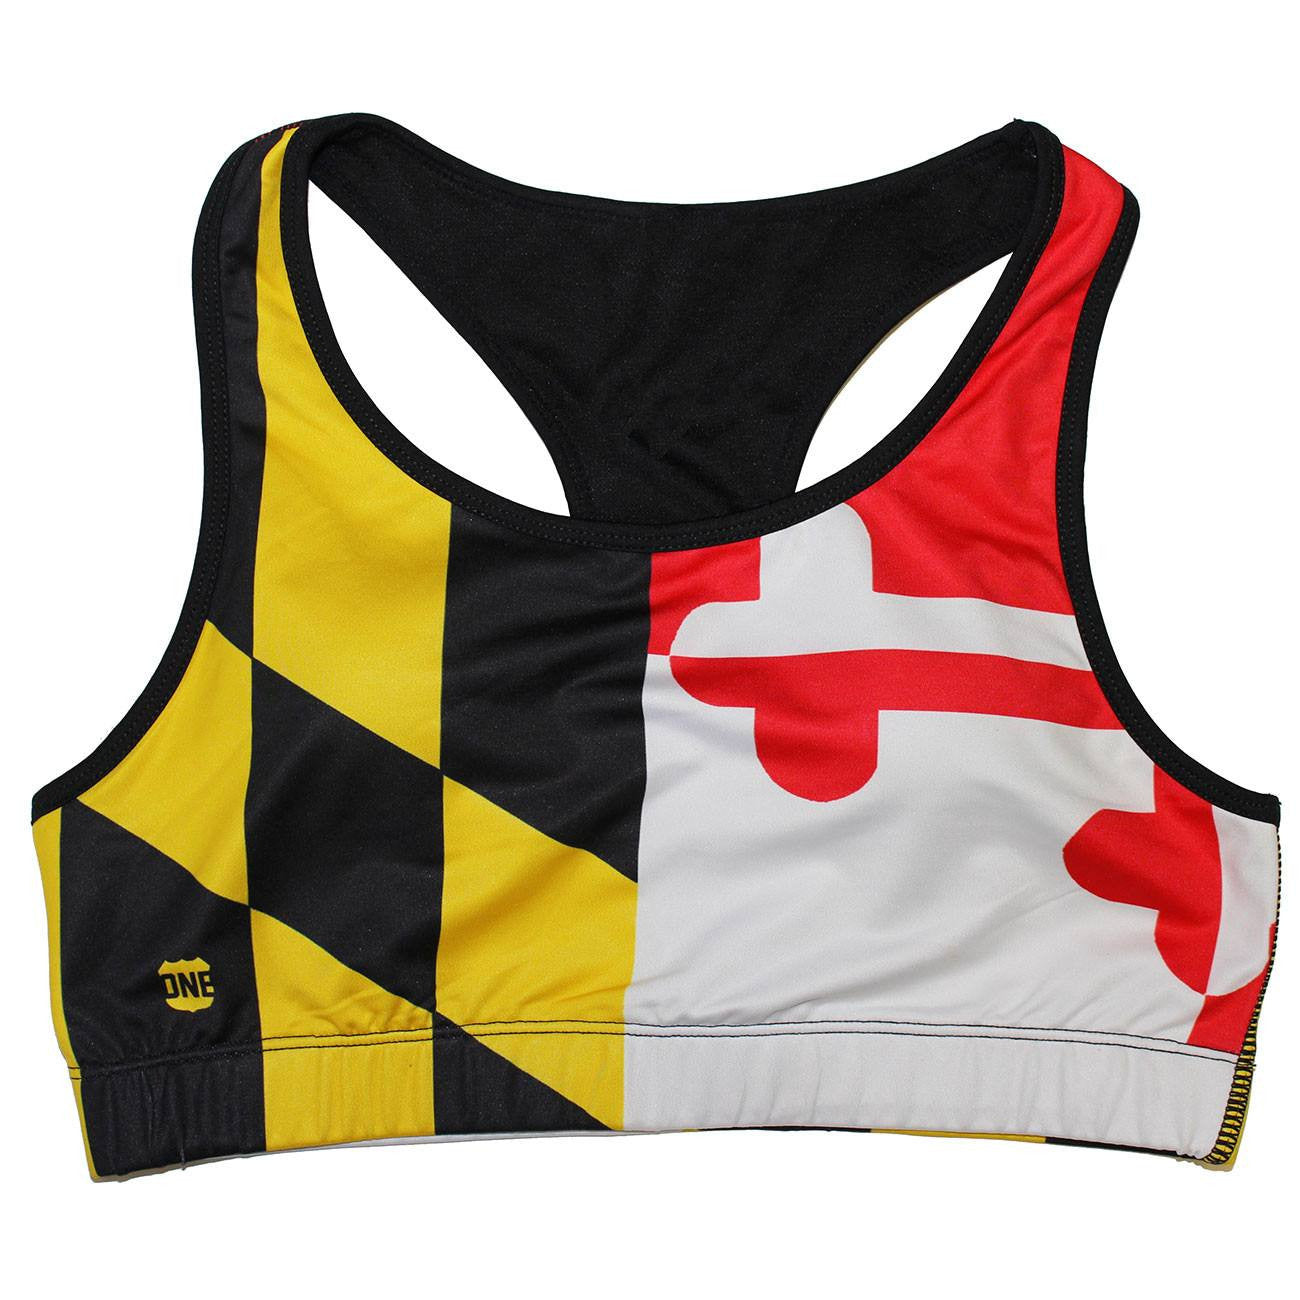 Route One Apparel - Maryland / Sports Bra *BUNDLE PACK